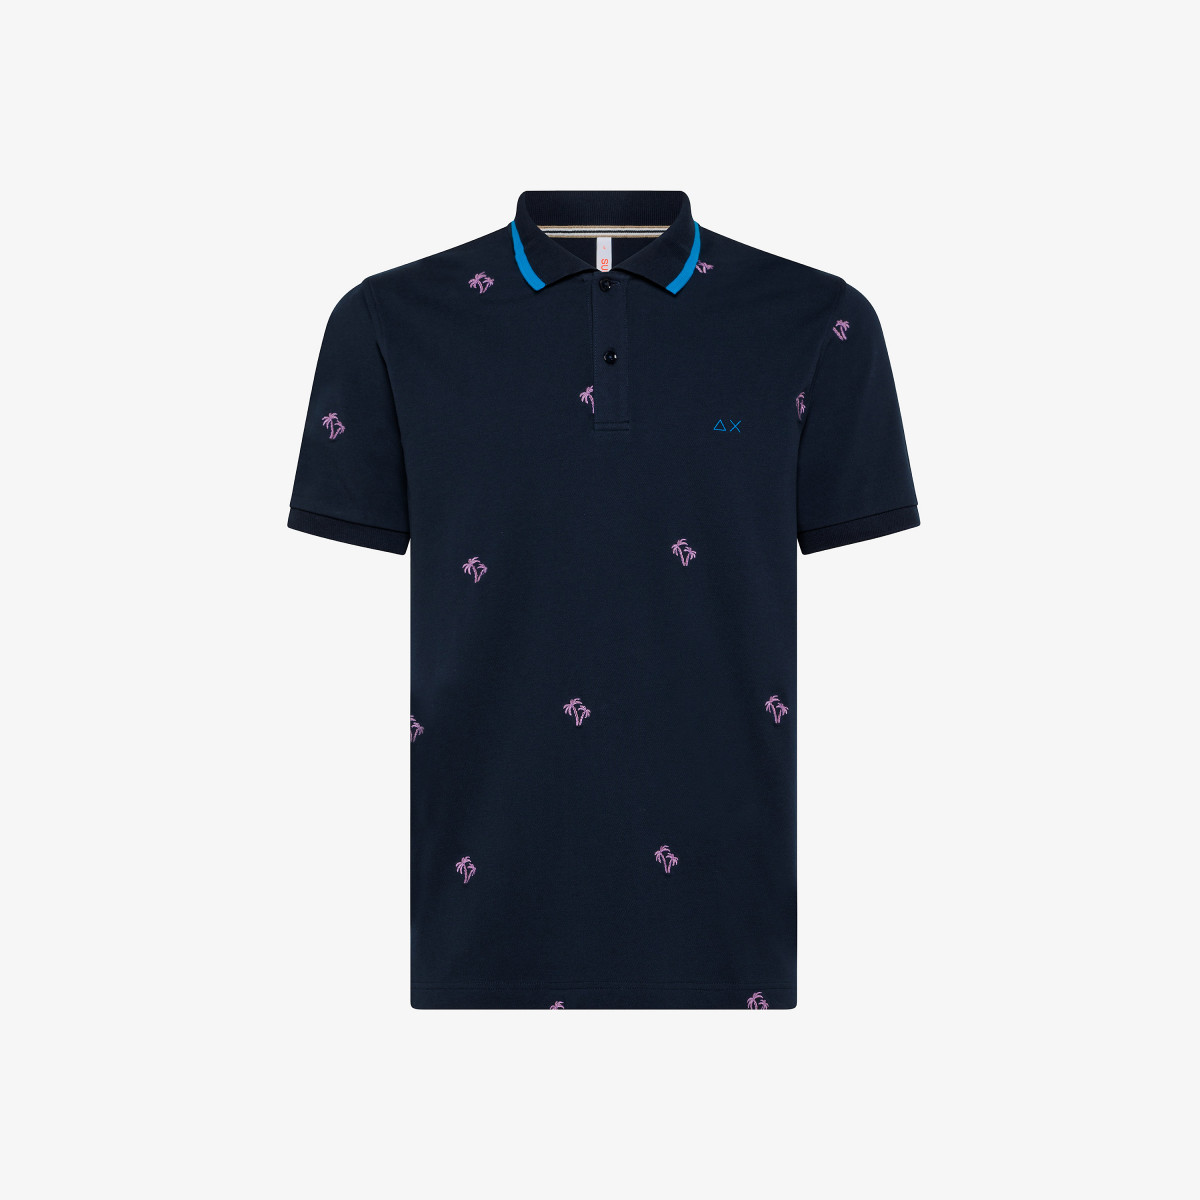 POLO FULL EMBRODERY EL. NAVY BLUE